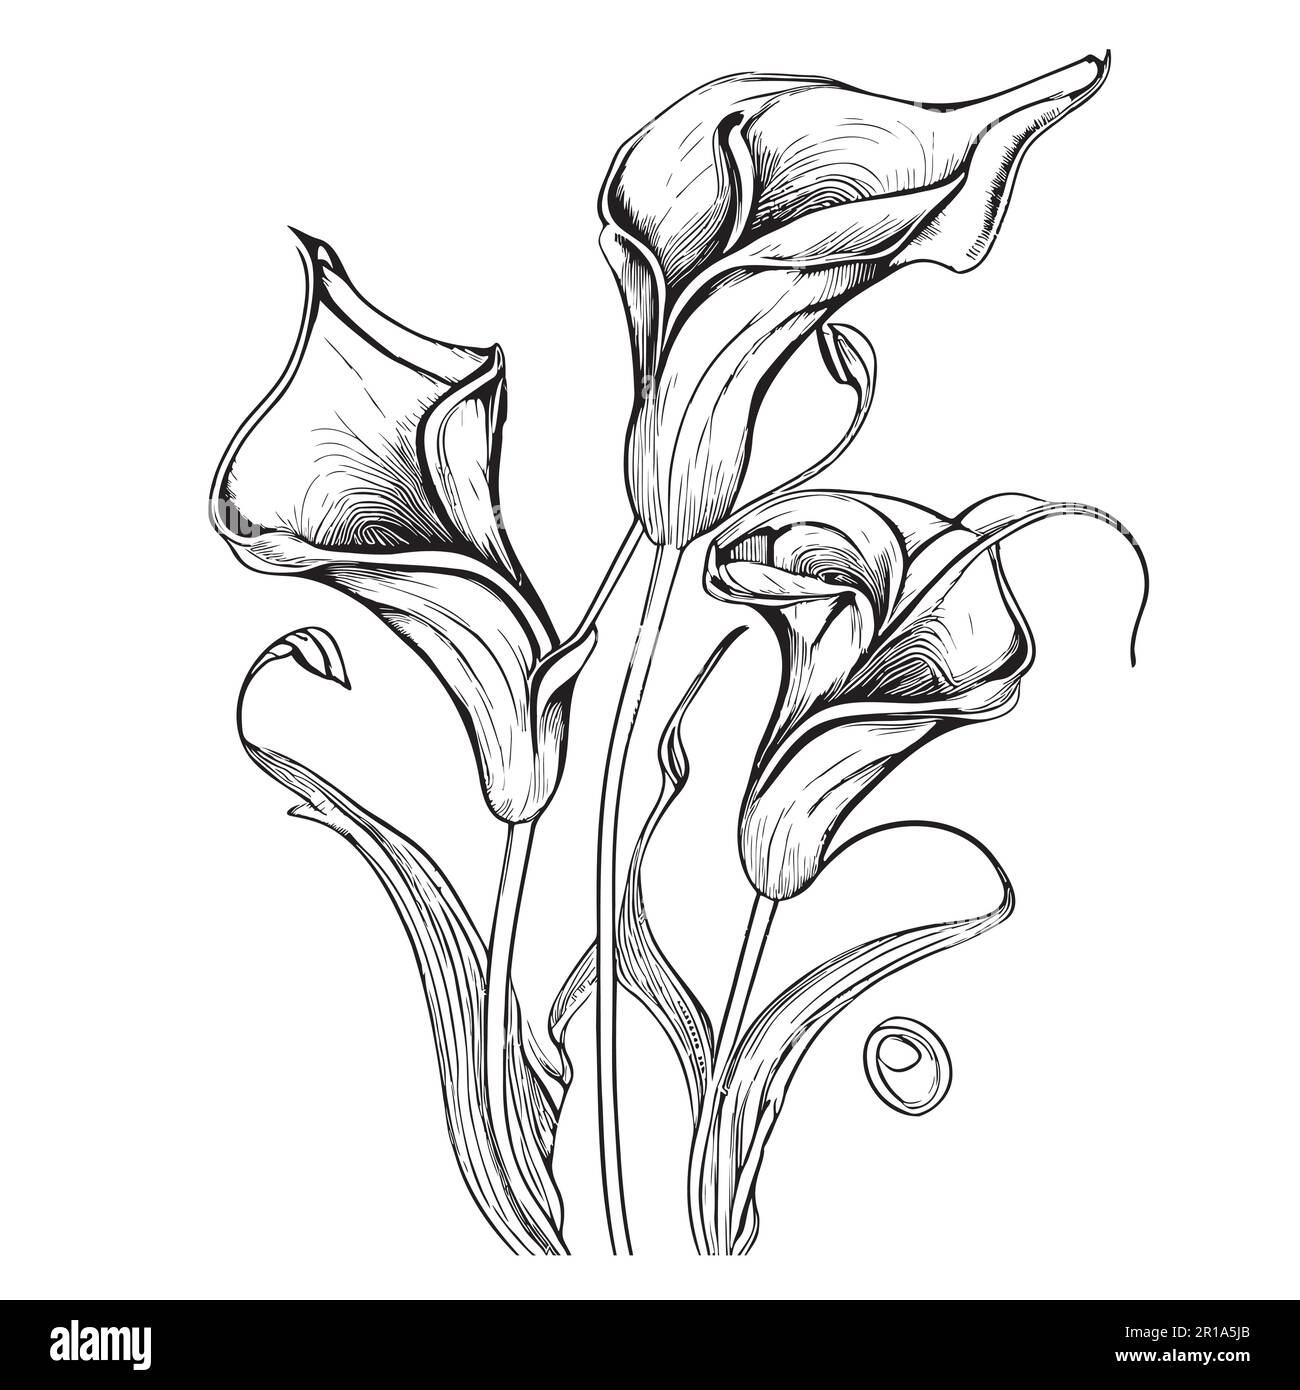 Calla lily flower hand drawn sketch in doodle style illustration Stock Vector